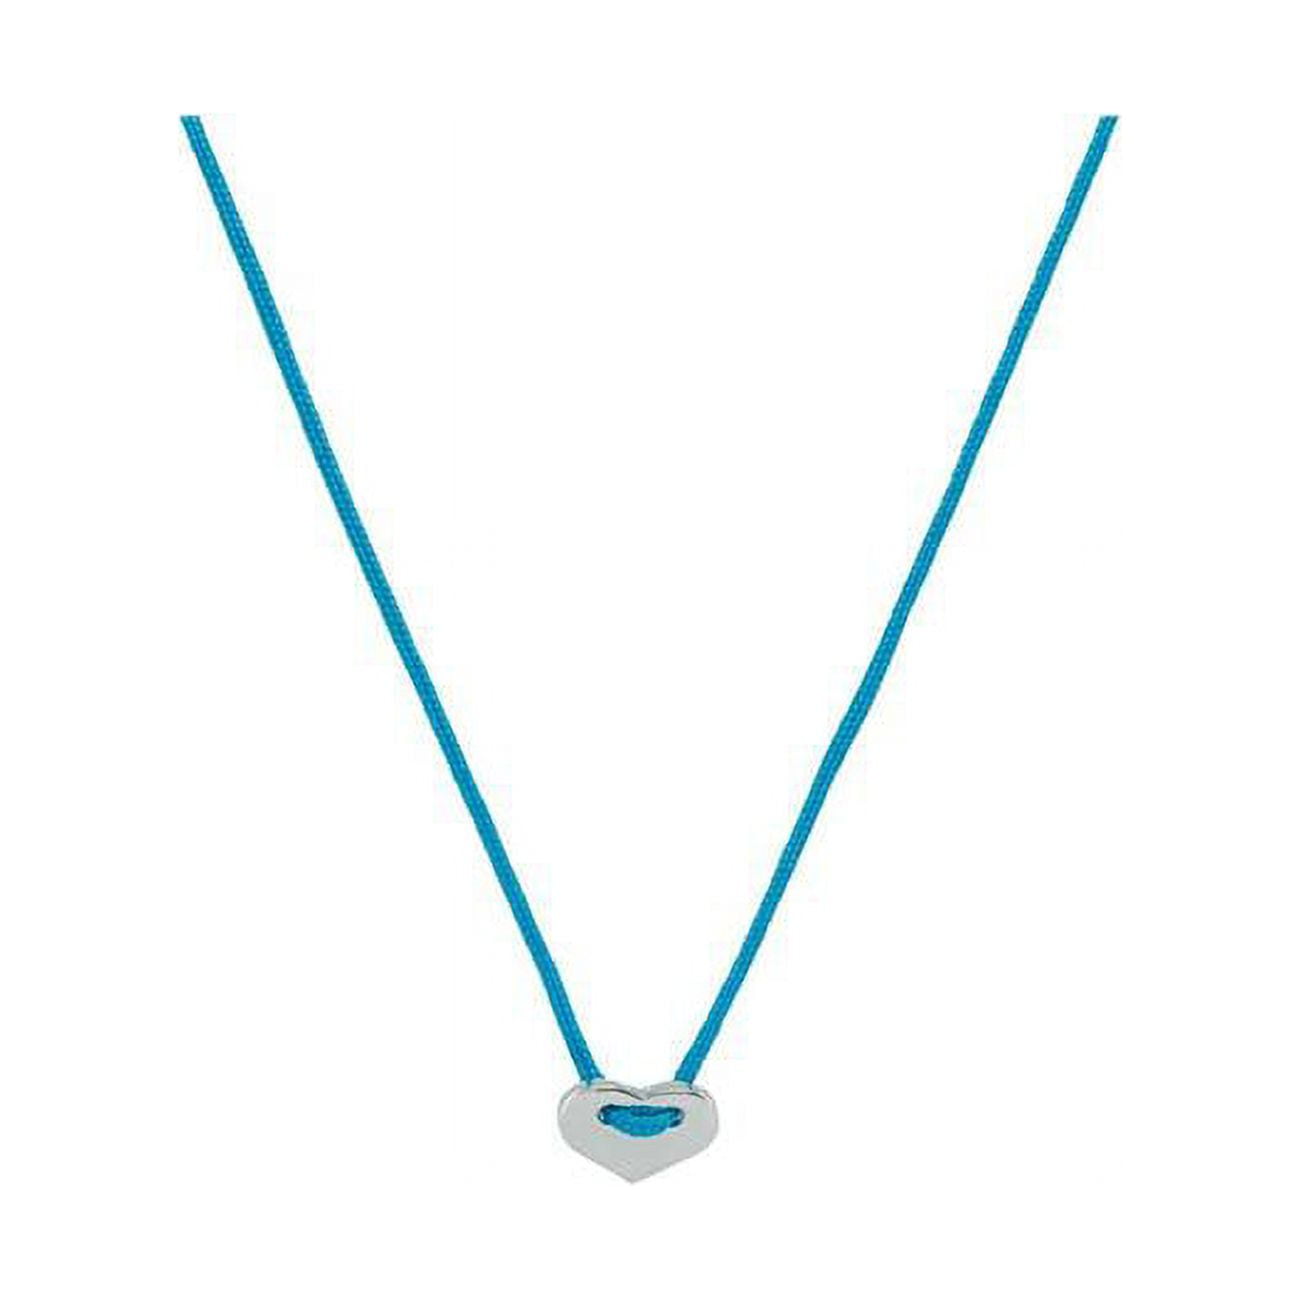 Teal Kindred Cord Mini Silver Heart Choker Necklace